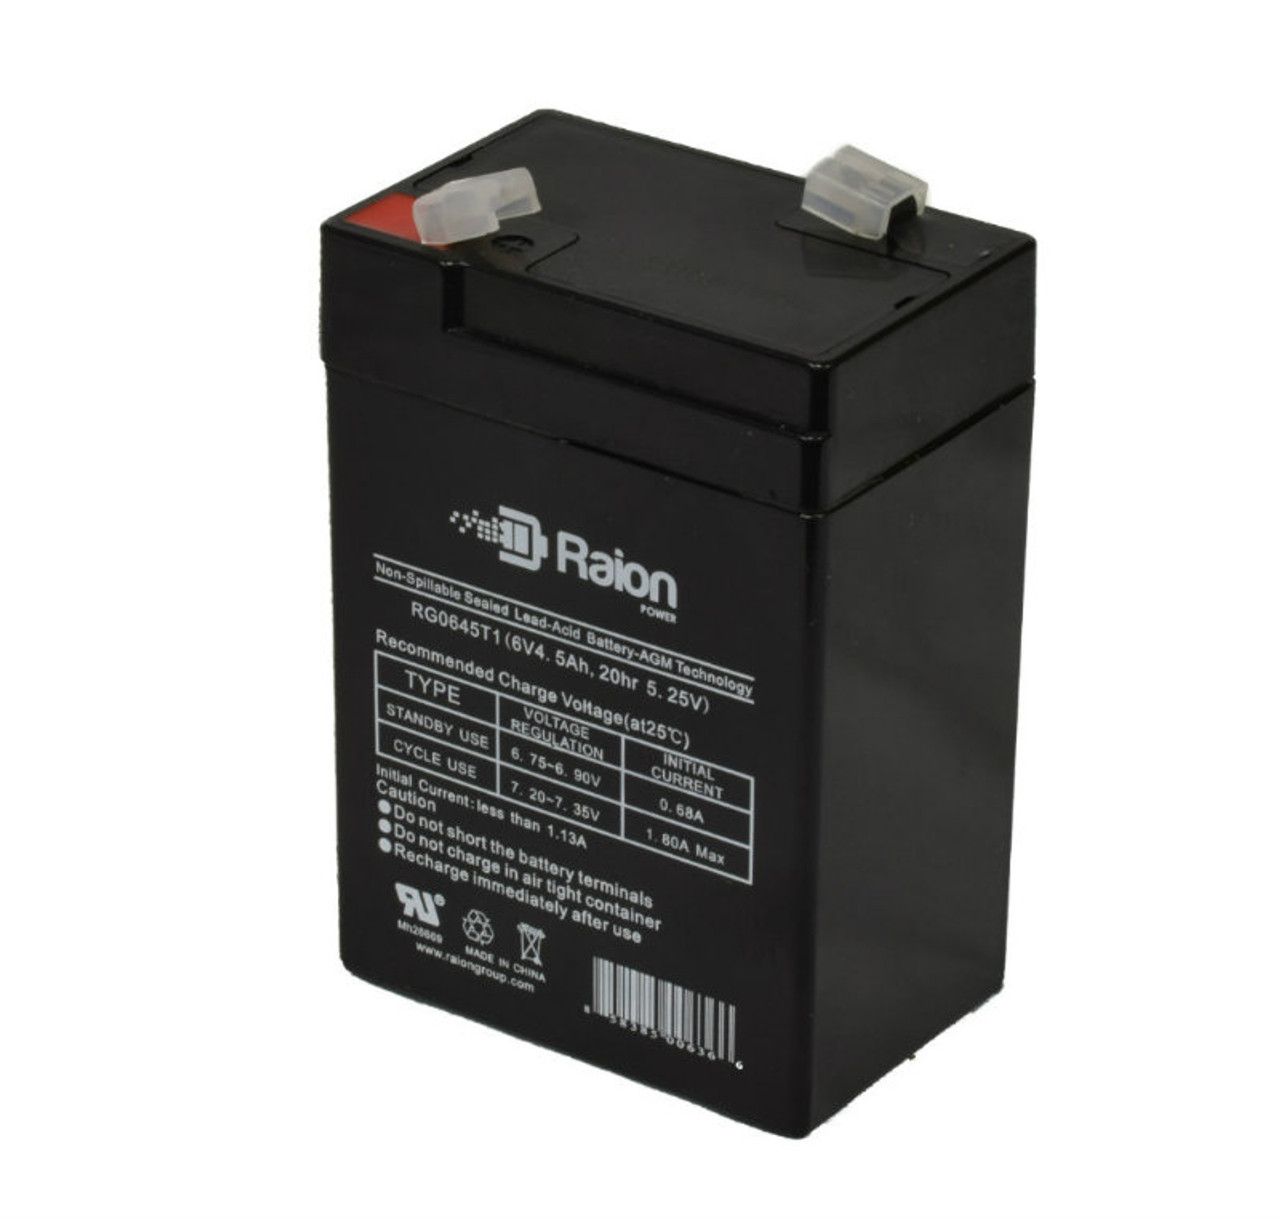 Raion Power RG0645T1 6V 4.5Ah Replacement Battery Cartridge for Long Way LW-3FM4.5BJ